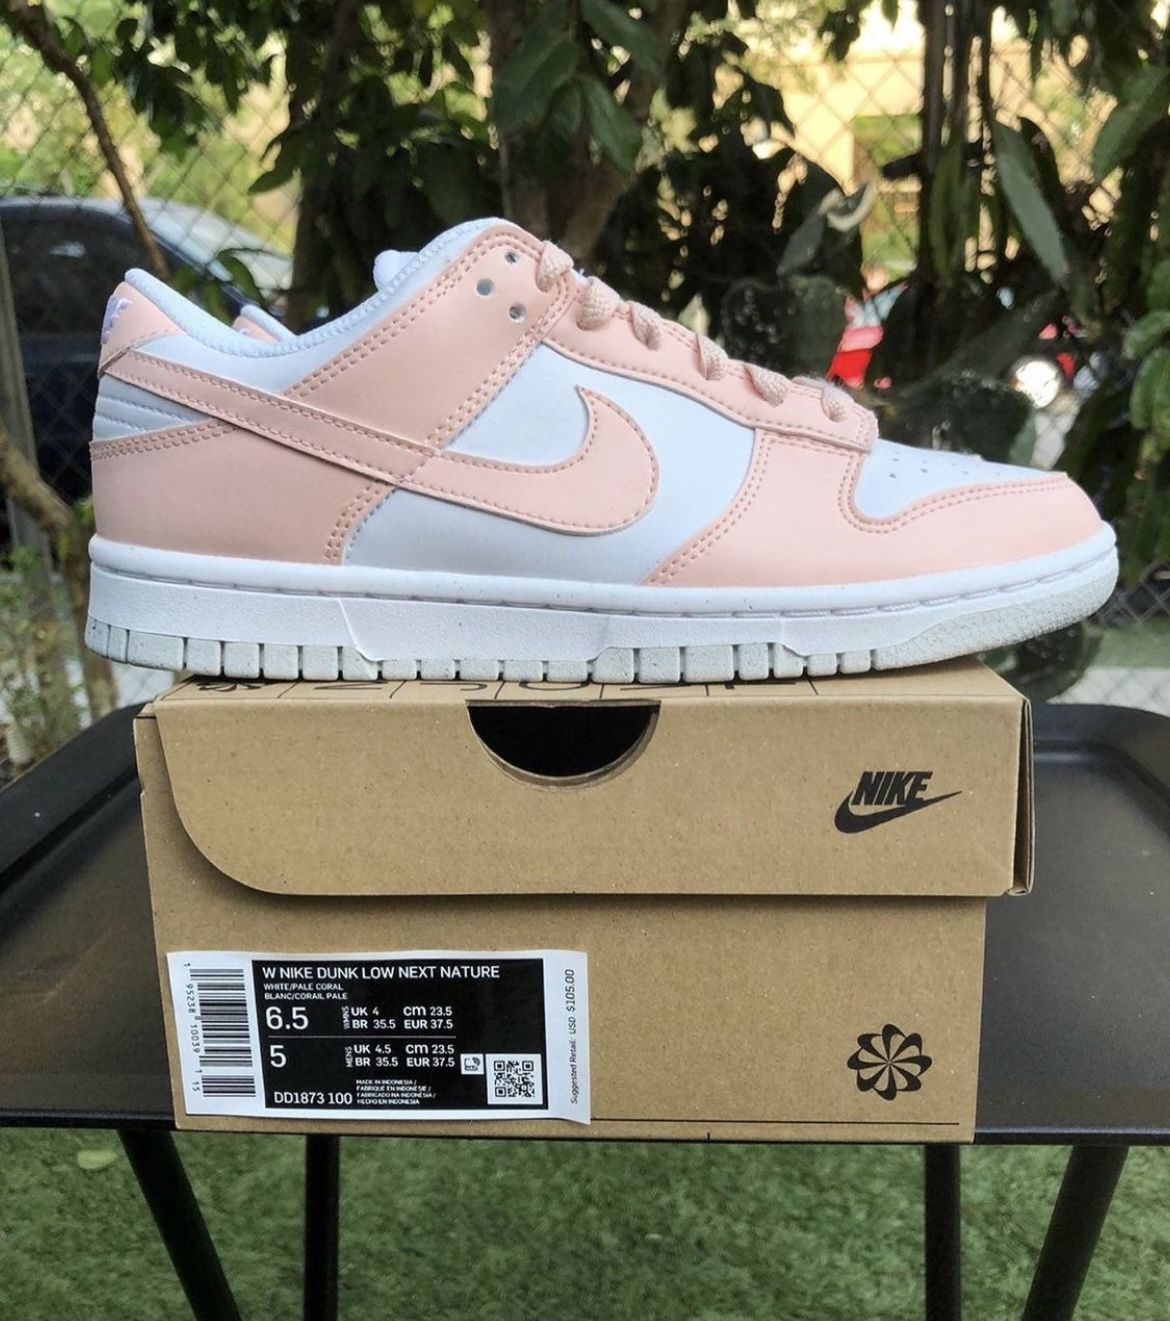 Nike Dunk Low Next Nature Pale Coral “DD1873-101” Sizing 7.5 And 6.5 Women’s !!! Read Description❤️